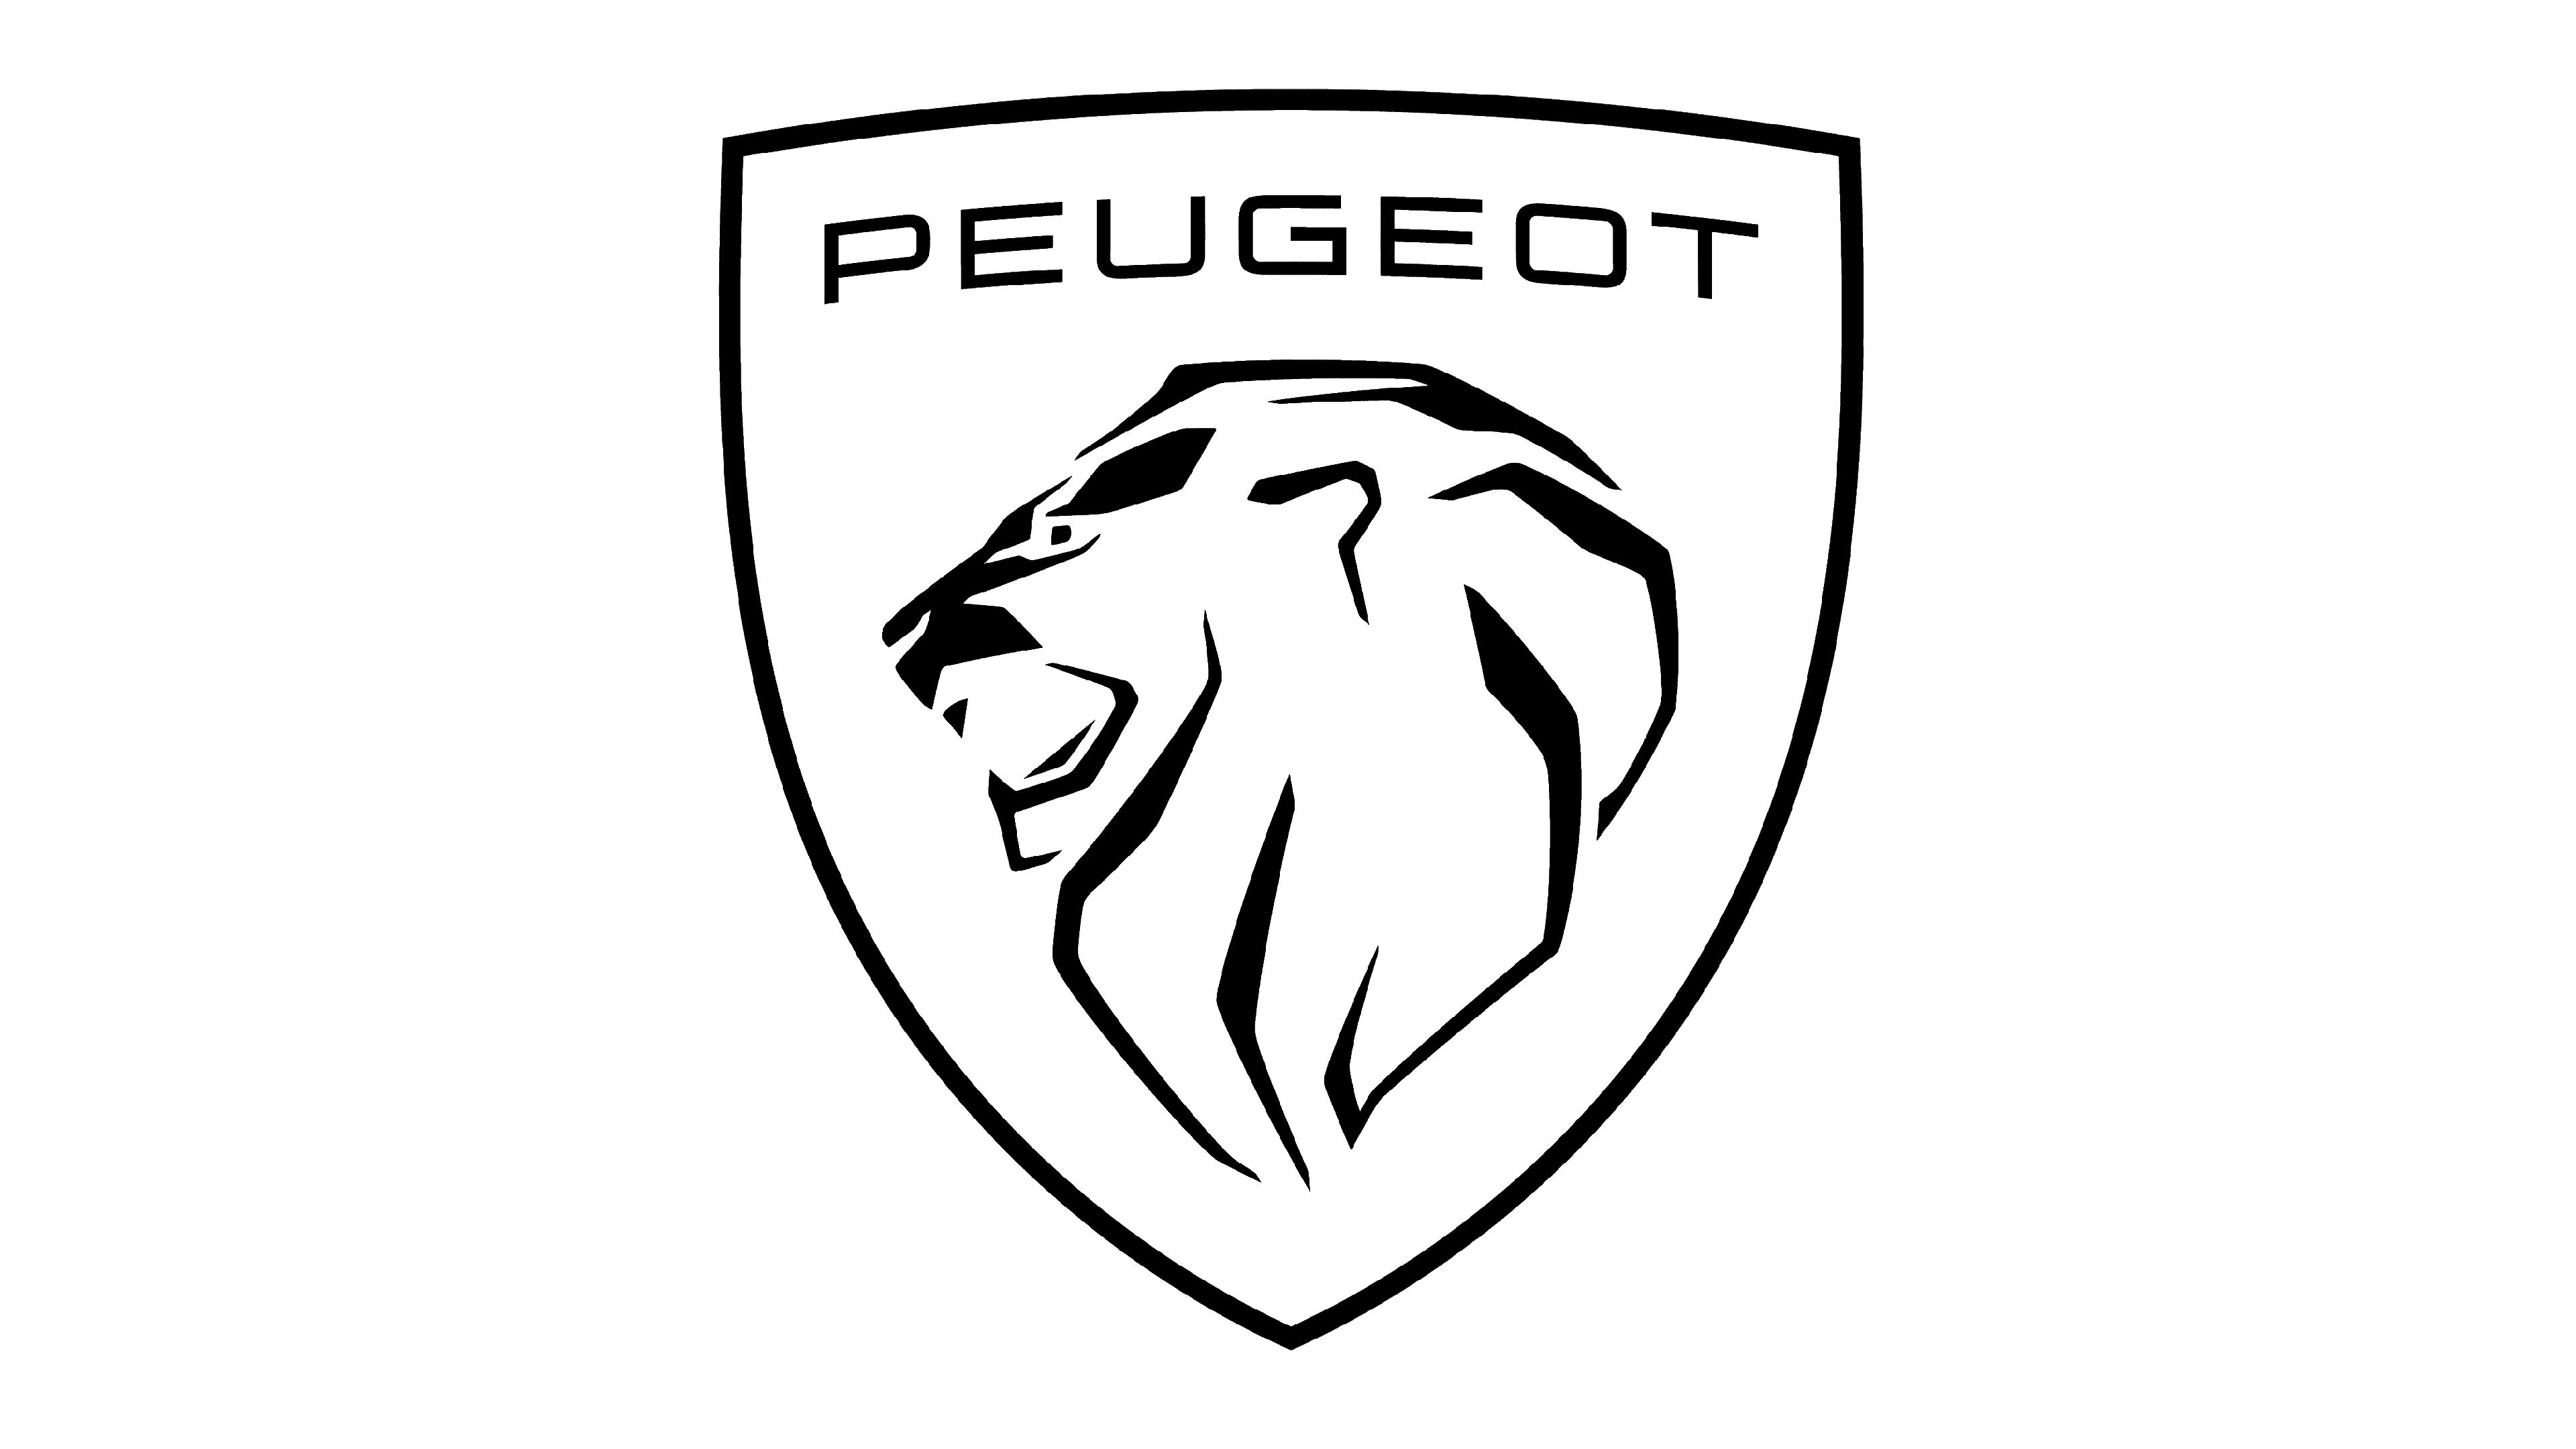 Peugeot Logo and sign, new logo meaning and history, PNG, SVG